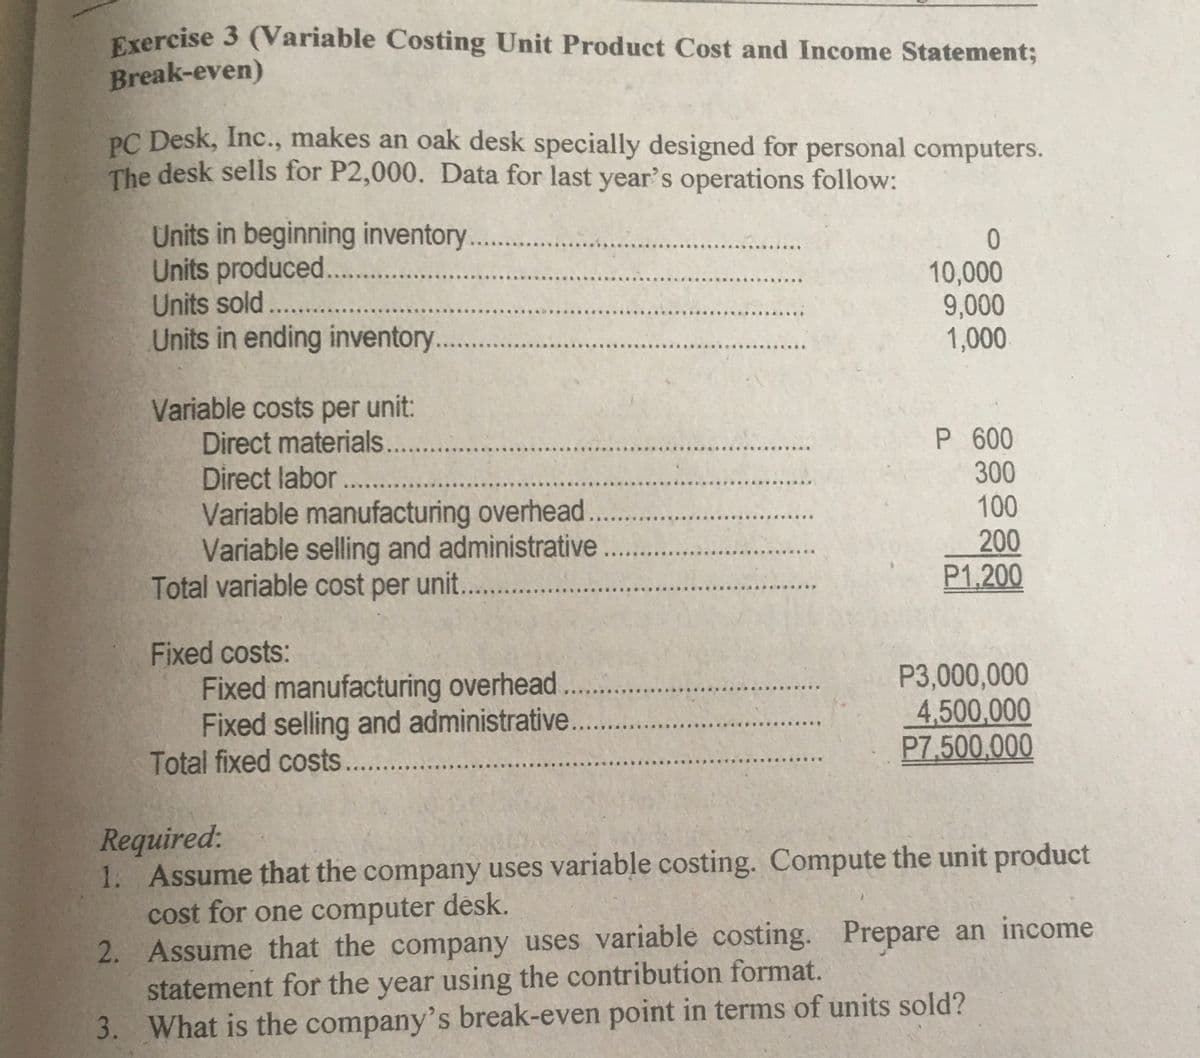 Exercise 3 (Variable Costing Unit Product Cost and Income Statement;
Break-even)
PC Desk, Inc., makes an oak desk specially designed for personal computers.
The desk sells for P2,000. Data for last year's operations follow:
Units in beginning inventory.
Units produced...
Units sold. .
Units in ending inventory
.....
10,000
9,000
1,000
...
...
Variable costs per unit:
Direct materials...
Direct labor ...
Variable manufacturing overhead..
Variable selling and administrative
Total variable cost per unit. ..
P 600
300
100
200
P1.200
Fixed costs:
Fixed manufacturing overhead...
Fixed selling and administrative.
Total fixed costs...
P3,000,000
4,500,000
P7,500.000
Required:
1. Assume that the company uses variable costing. Compute the unit product
cost for one computer desk.
2. Assume that the company uses variable costing. Prepare an income
statement for the year using the contribution format.
3. What is the company's break-even point in terms of units sold?
